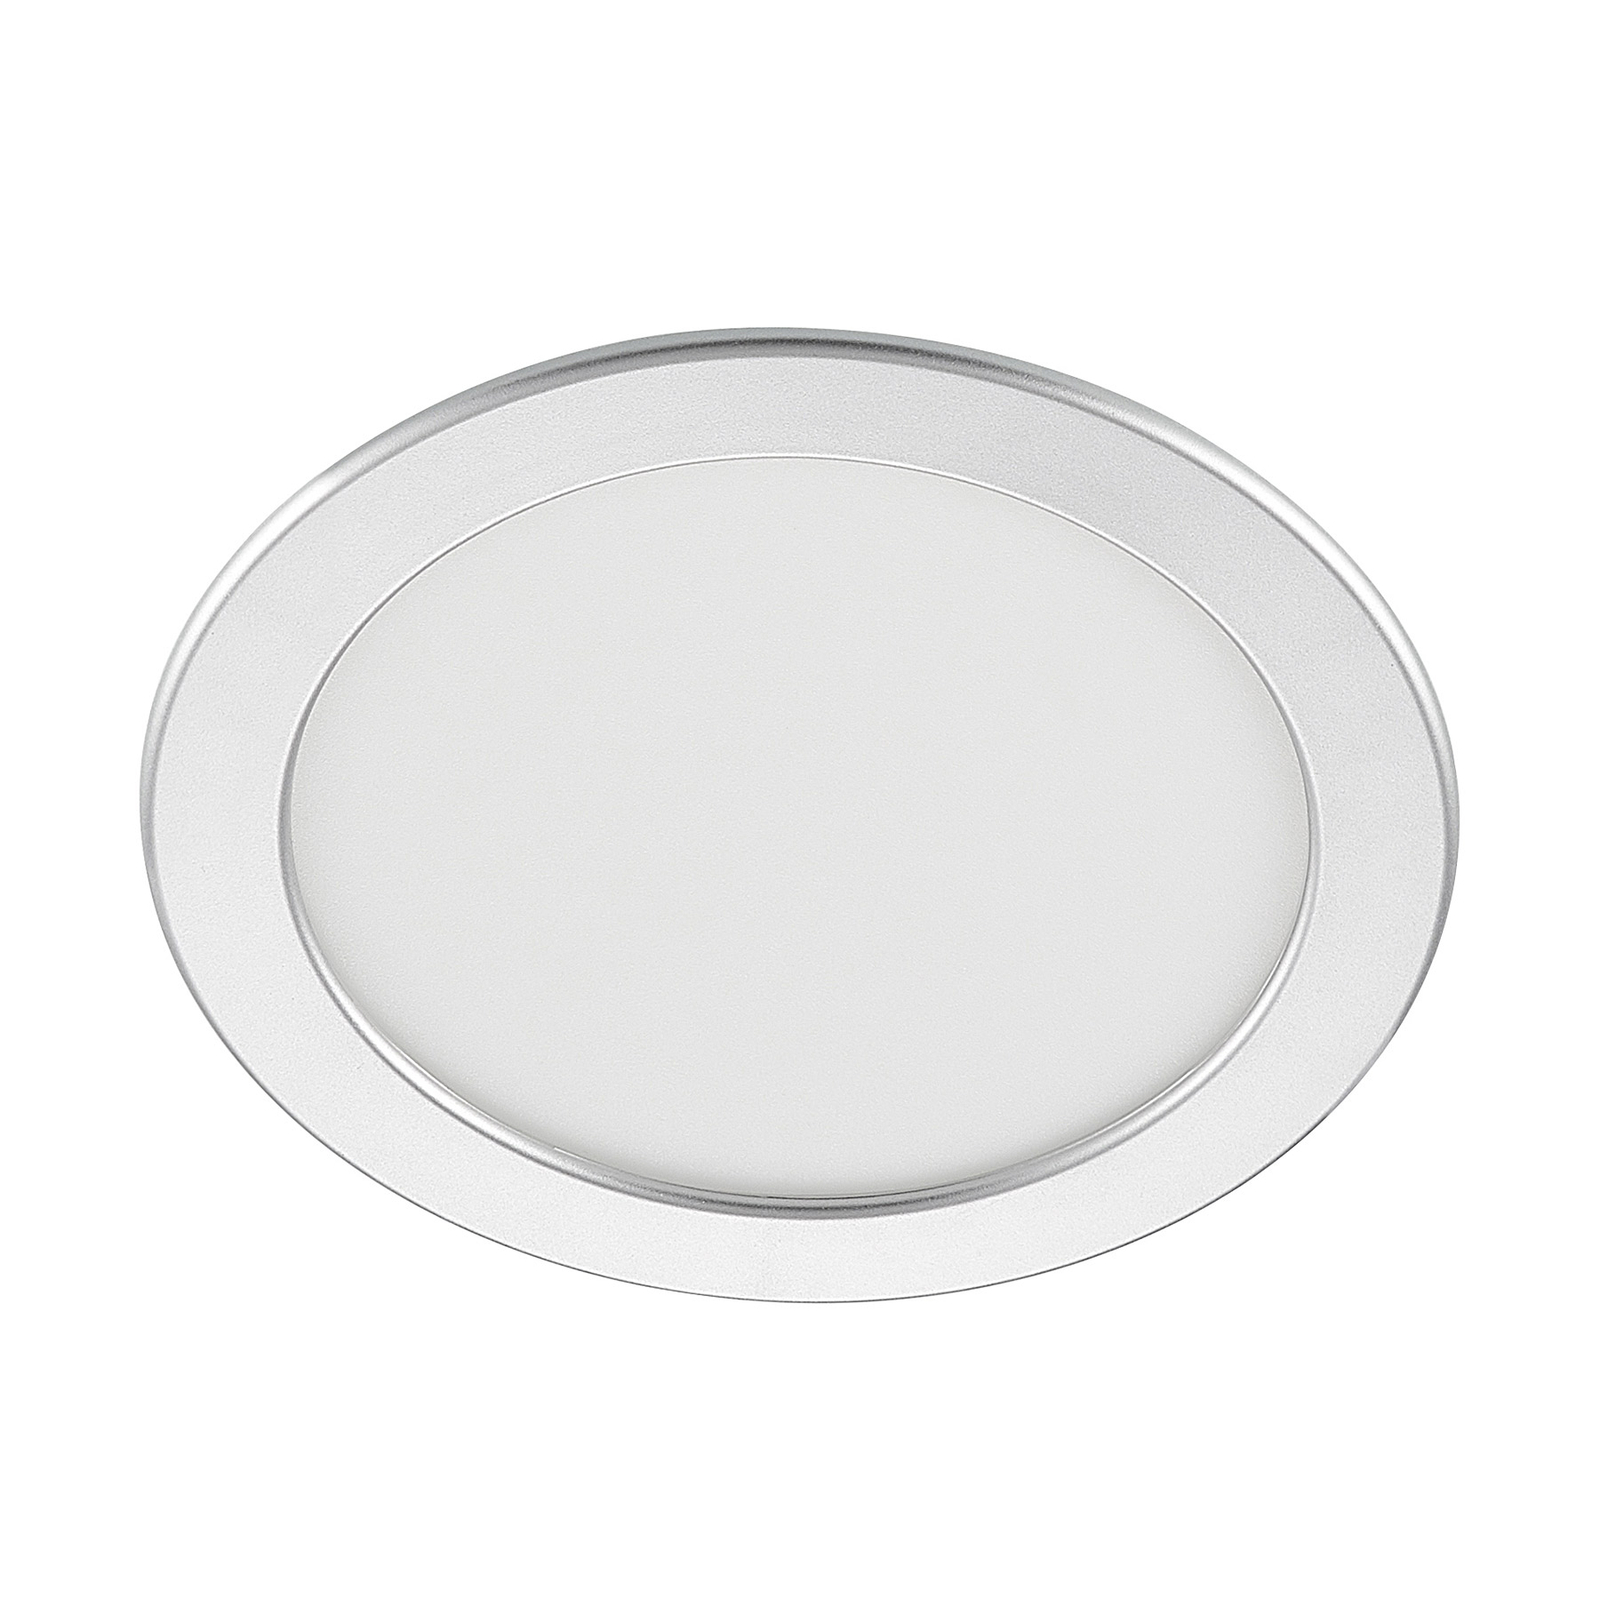 Prios LED recessed light Cadance, silver, 22 cm, dimmable